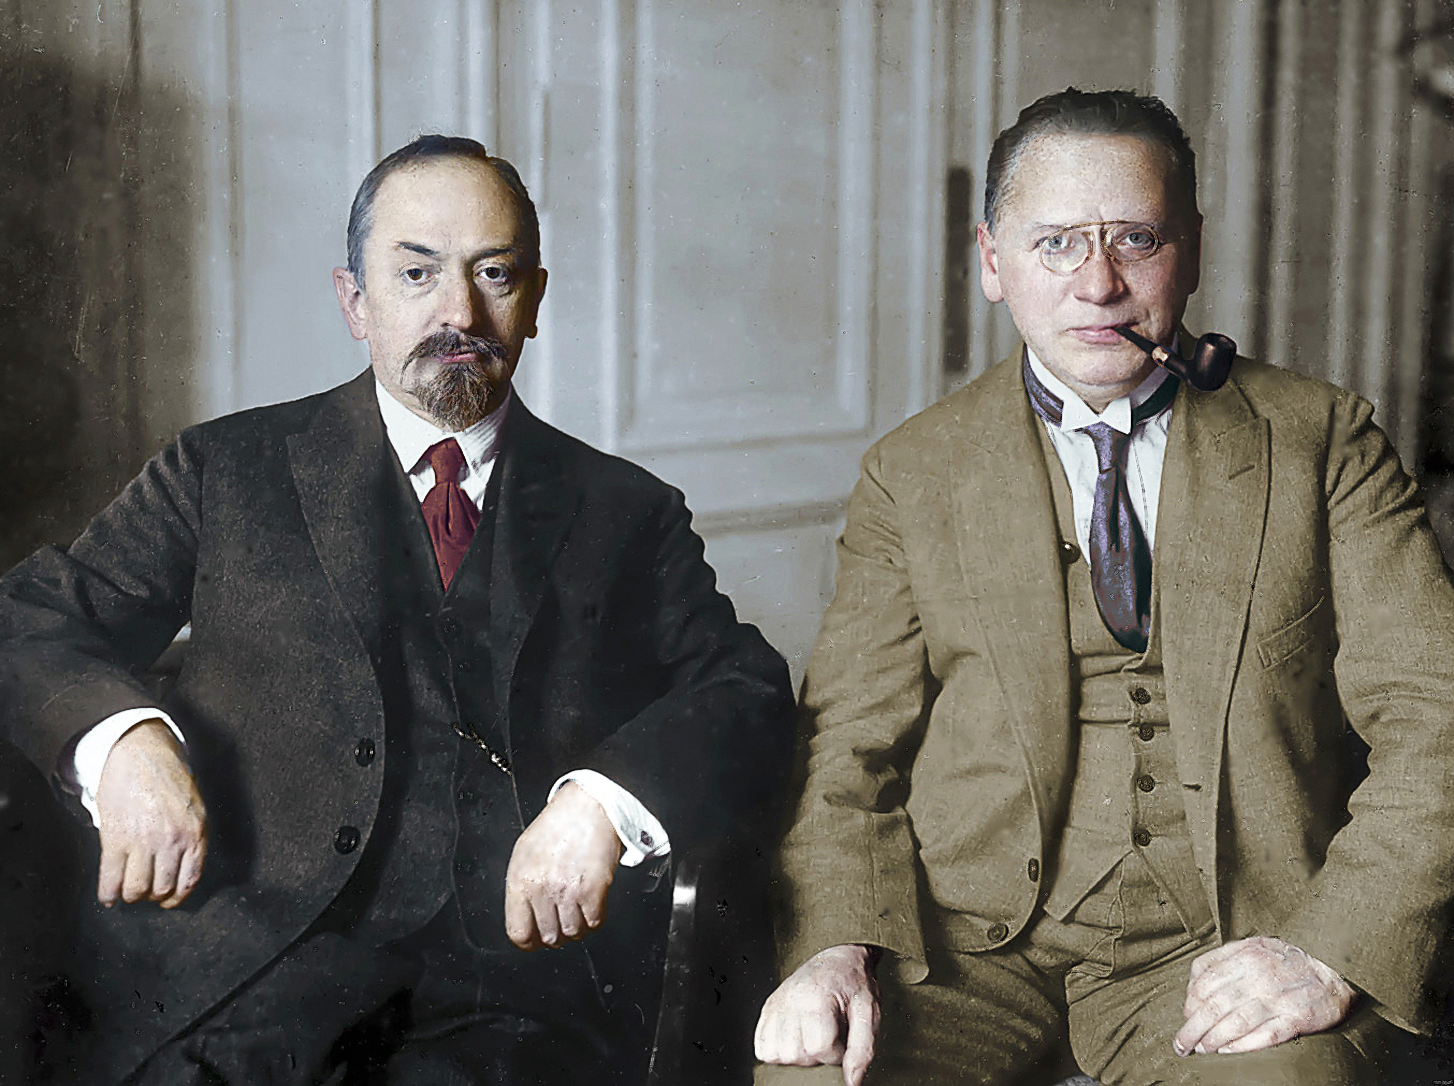 chicherin-and-litvinov-1920s-moscow.png